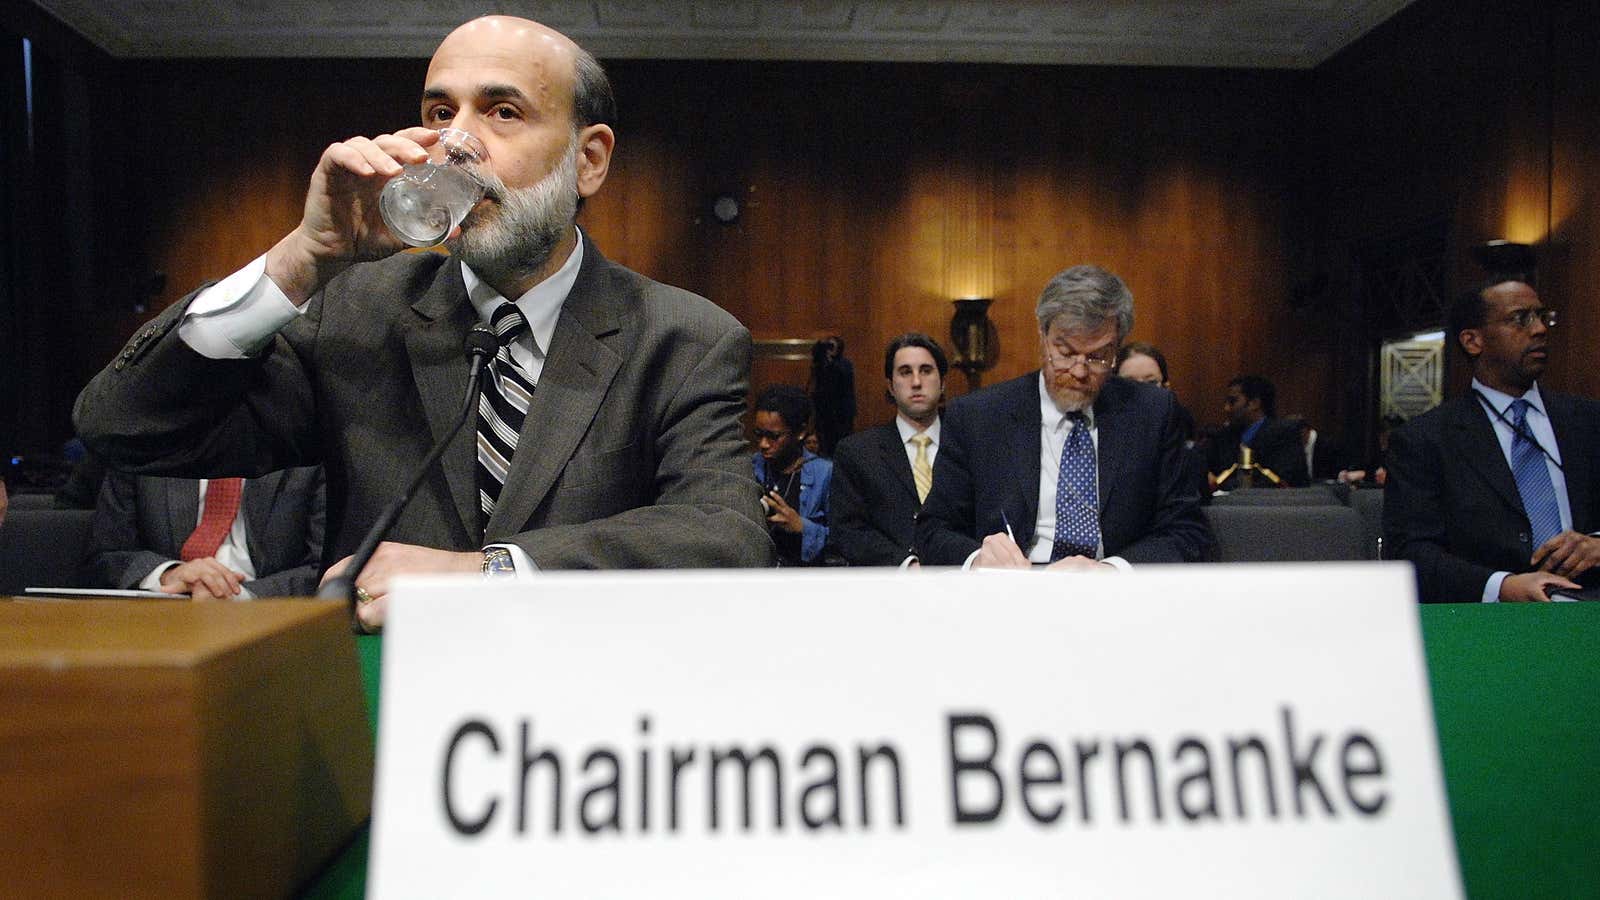 Protip: When fighting financial and economic crises, stay hydrated.